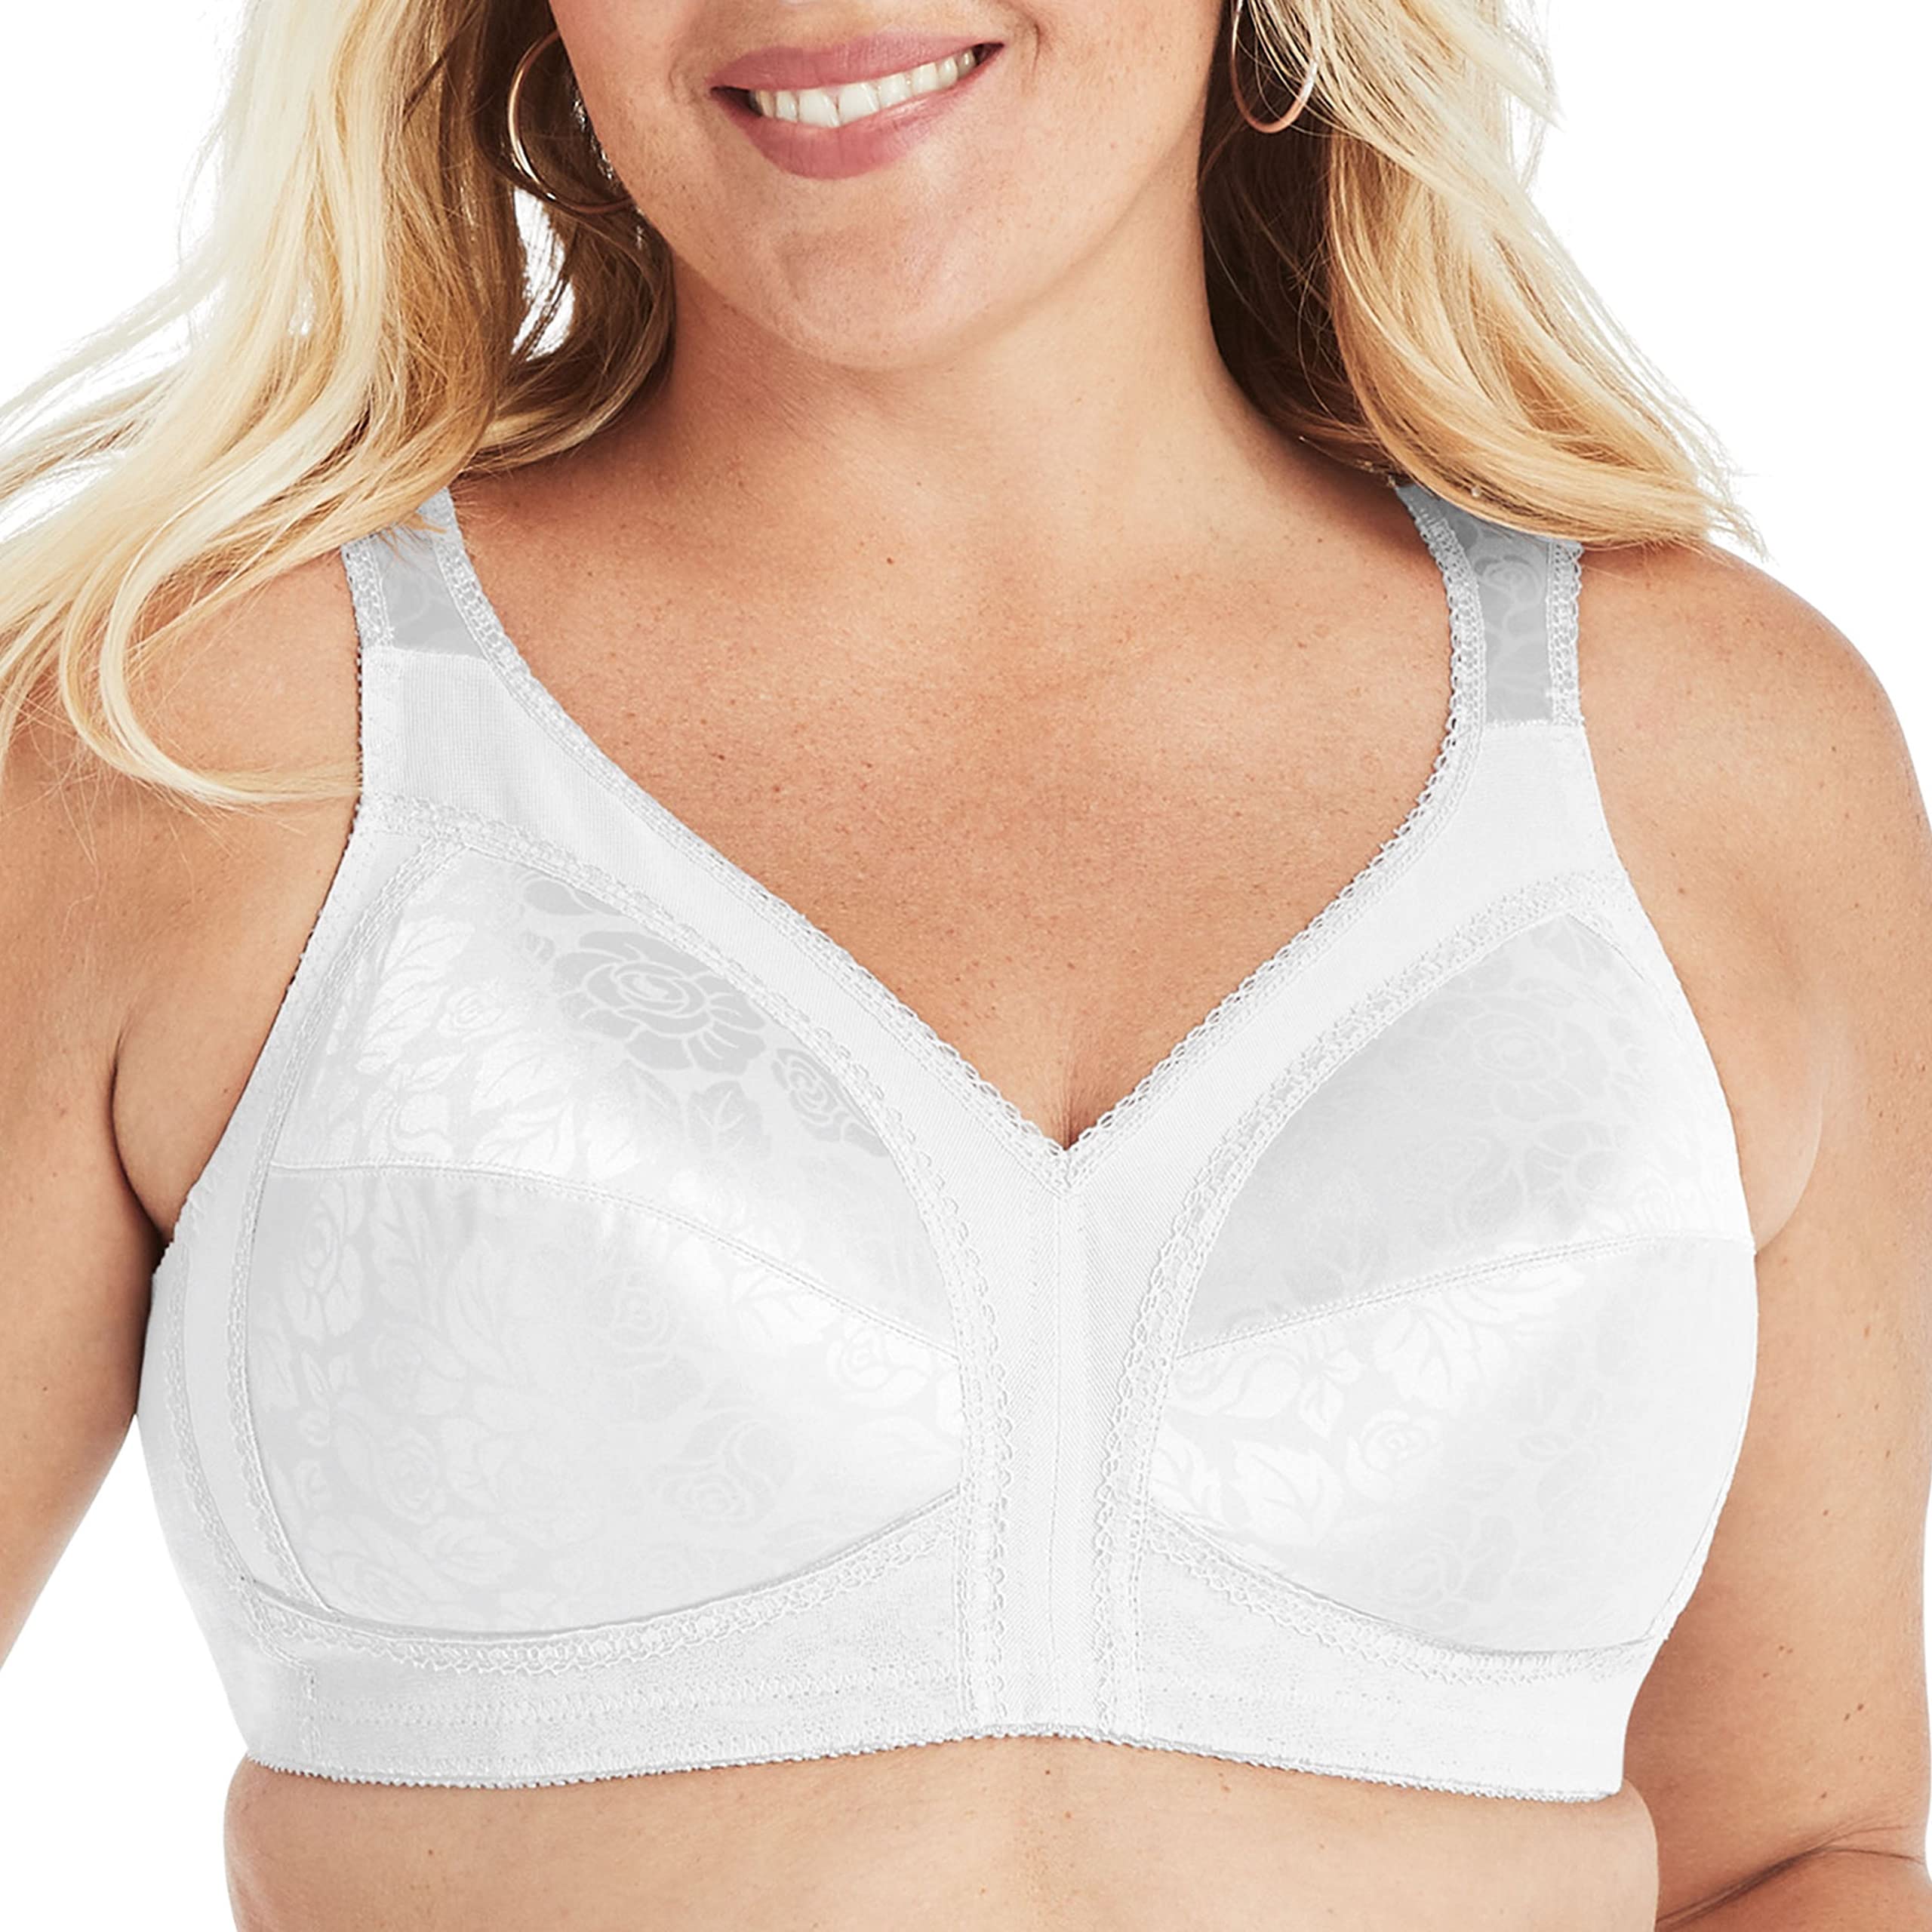 Playtex Women's 18 Hour Original Comfort Strap Full Coverage Bra Us4693, Available in Single and 2-Packs